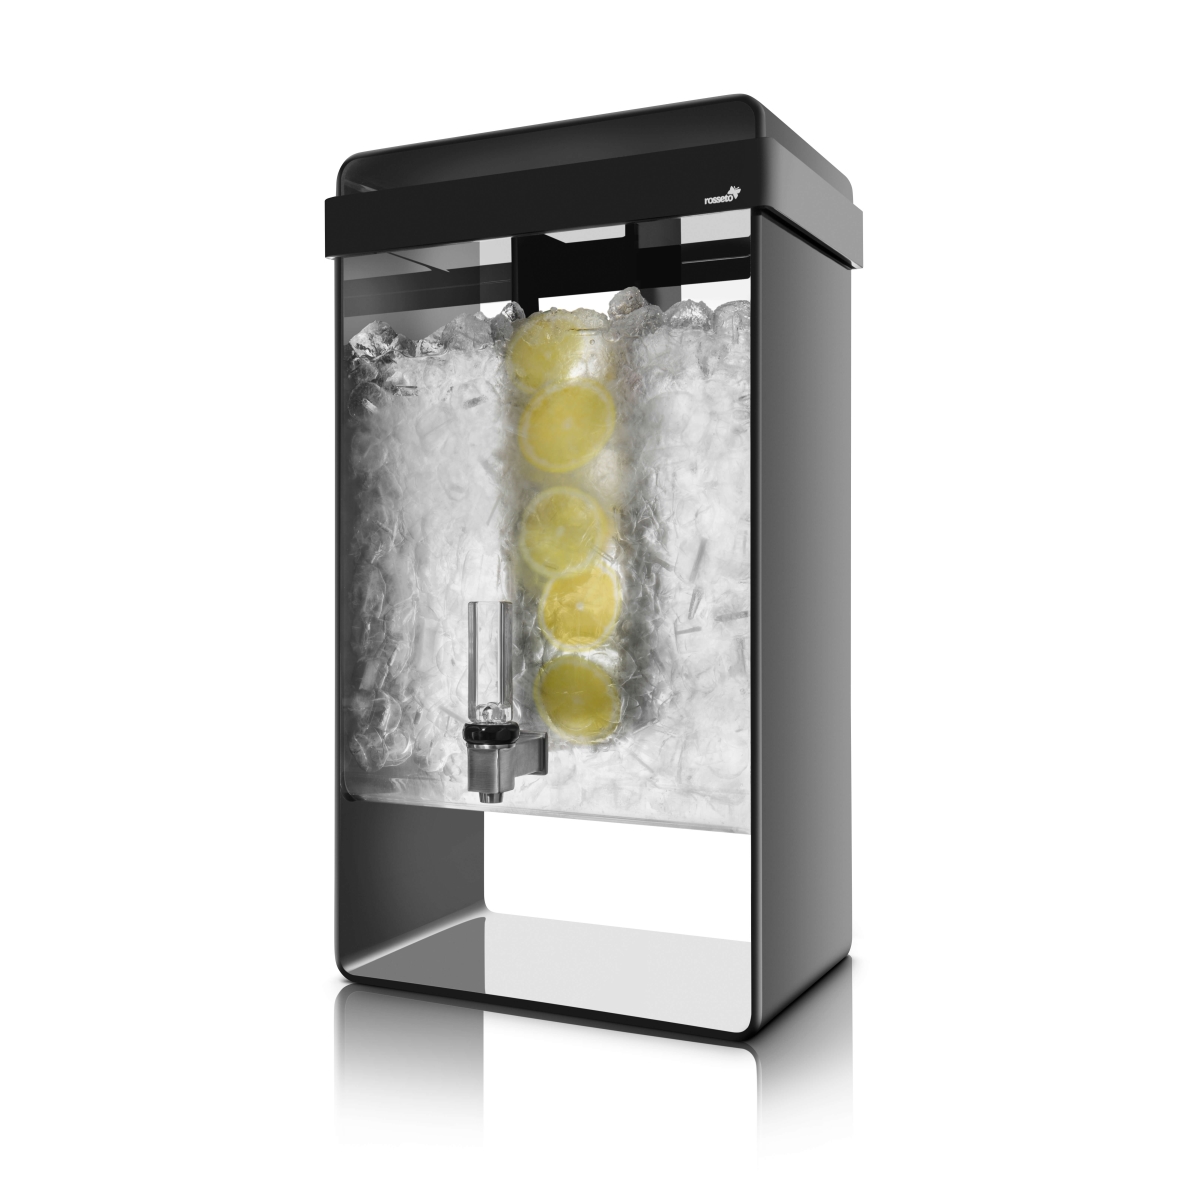 Picture of Rosseto LD156 5 gal Infusion Black Beverage Dispenser